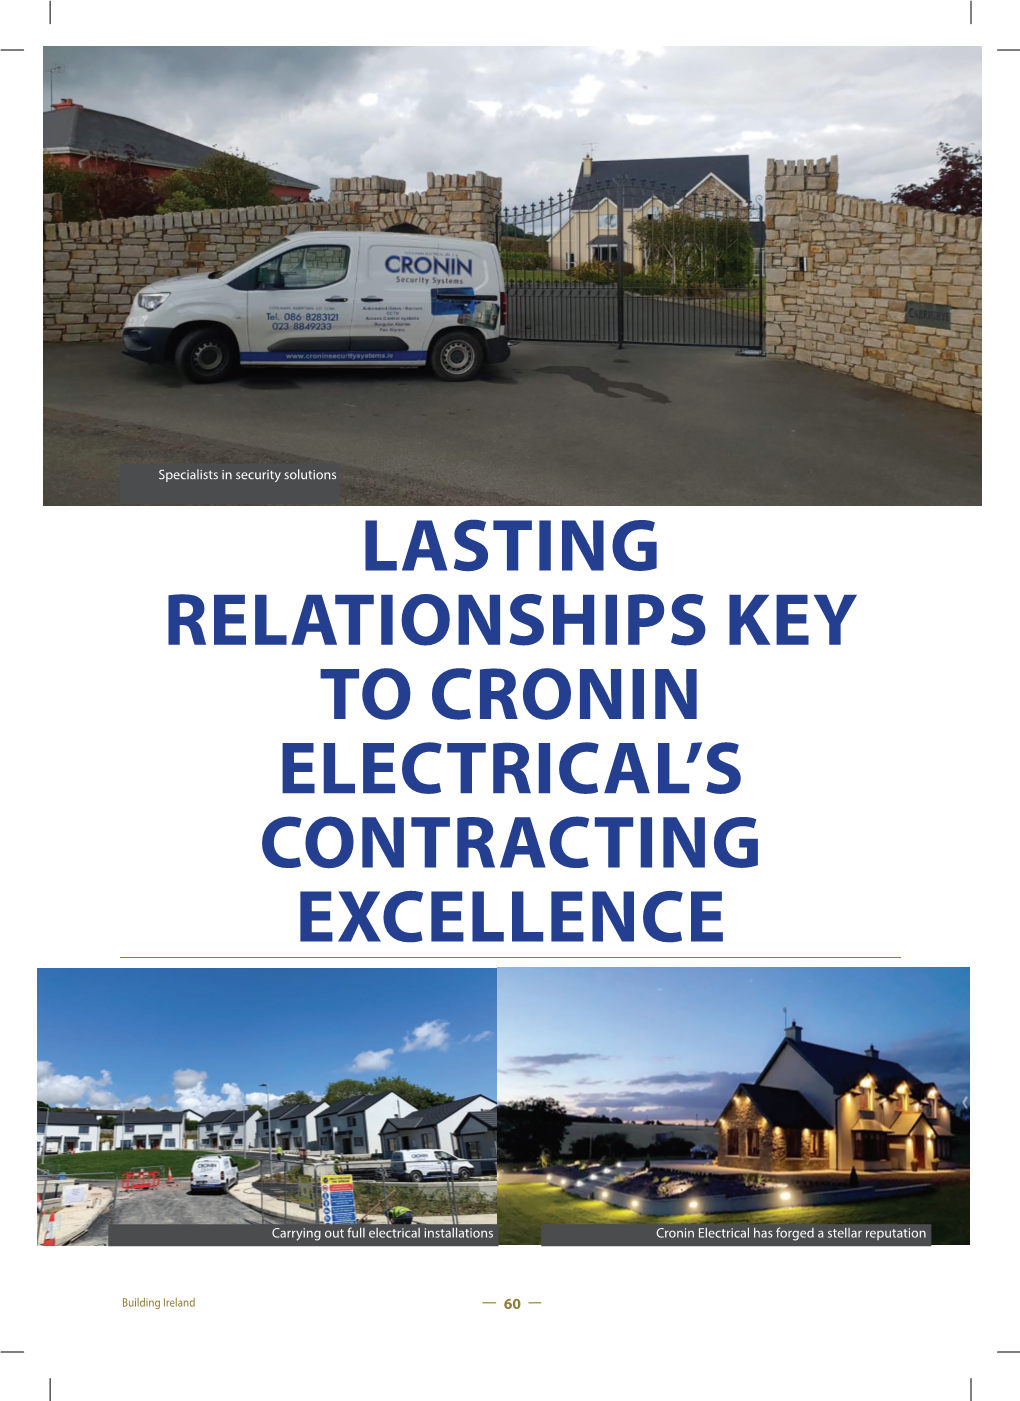 Lasting Relationships Key to Cronin Electrical's